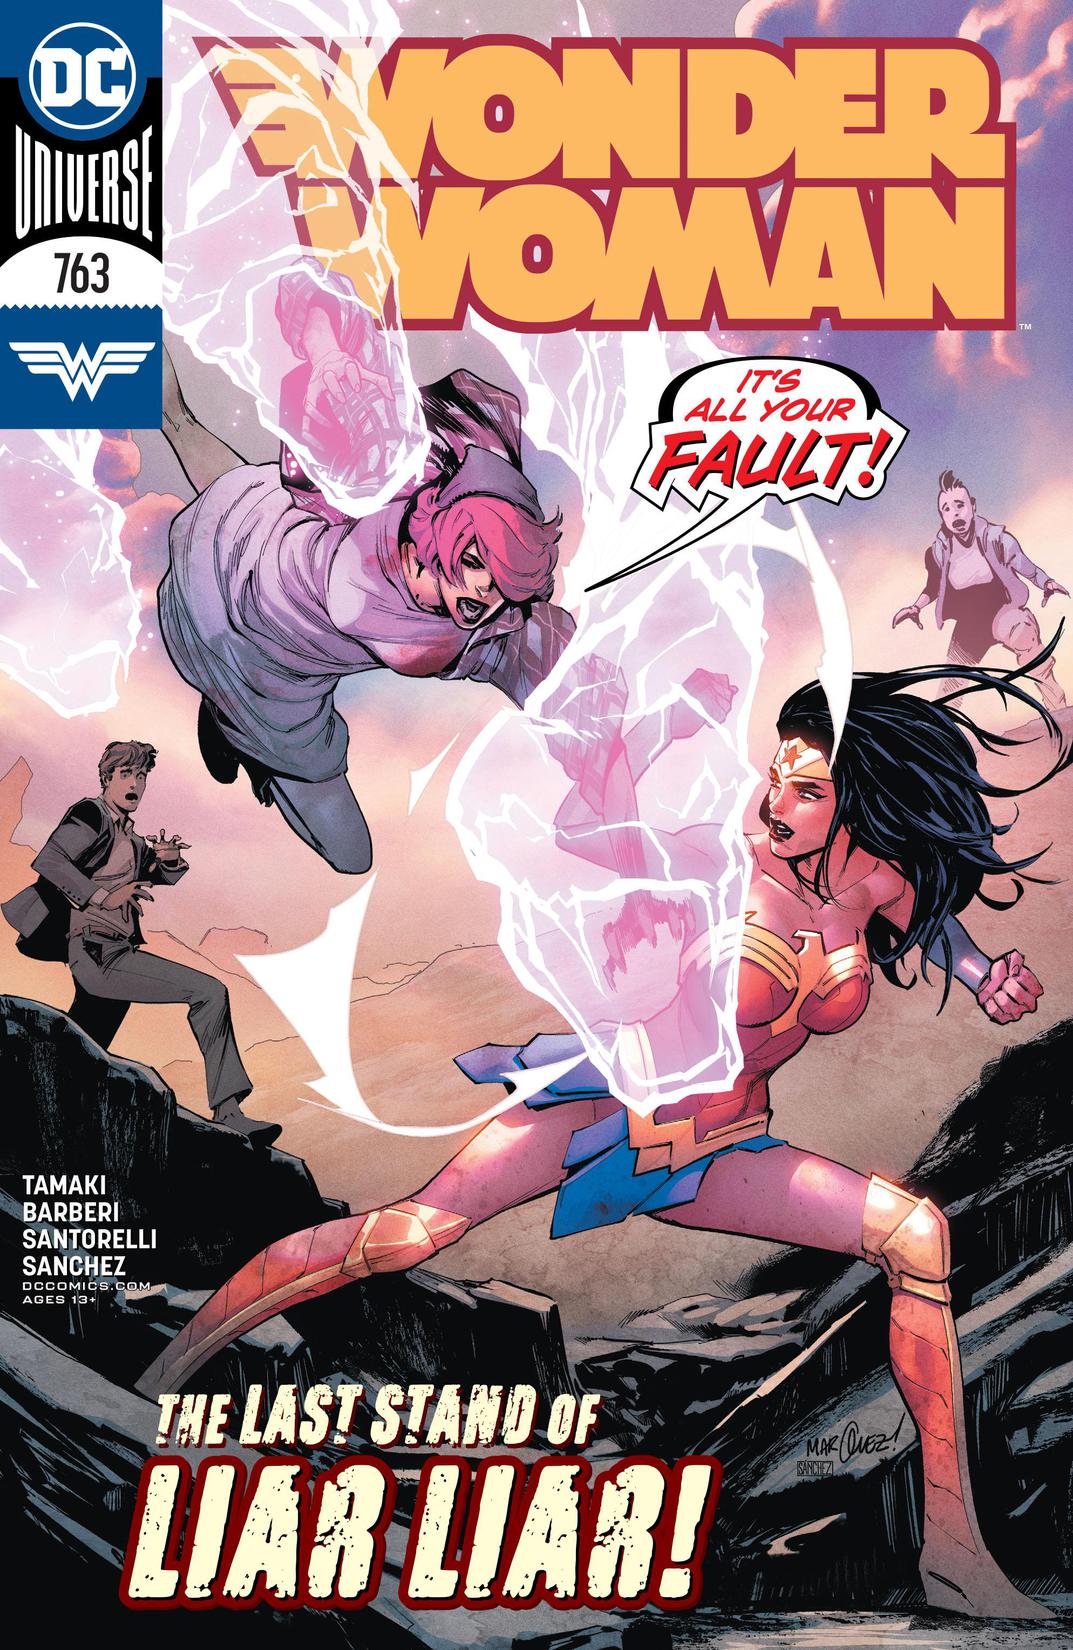 Wonder Woman (2016-) #763 preview images